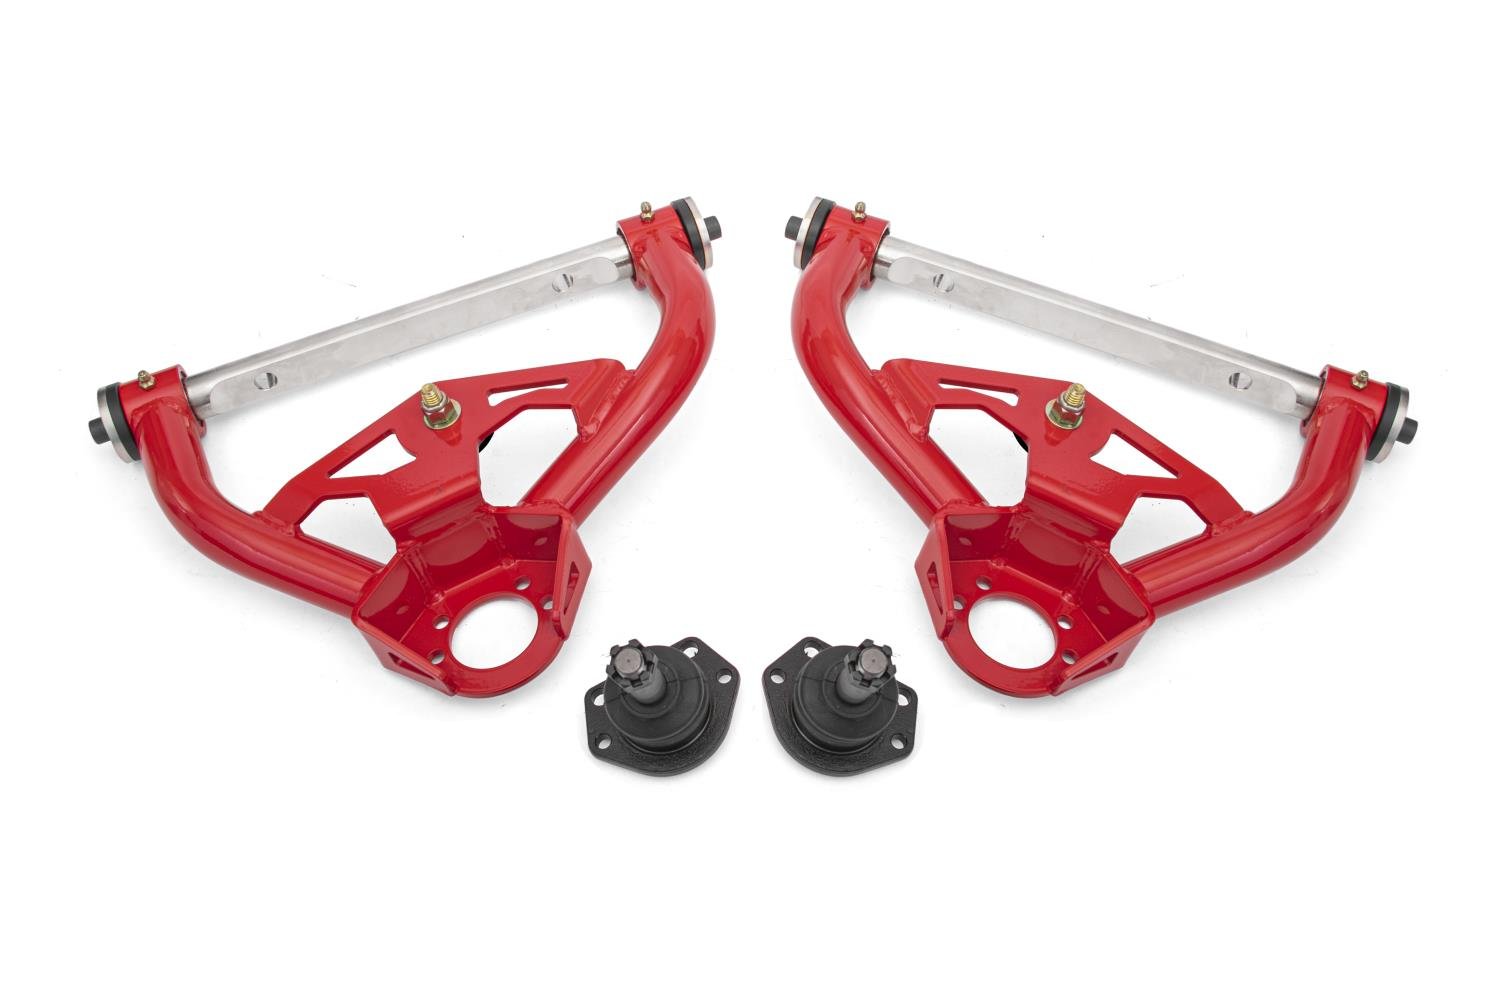 AAU462R Upper Control Arms w/Delrin Bushings & 1/2 in. Taller Ball Joints for Select 1978-1987 GM Cars (Red)